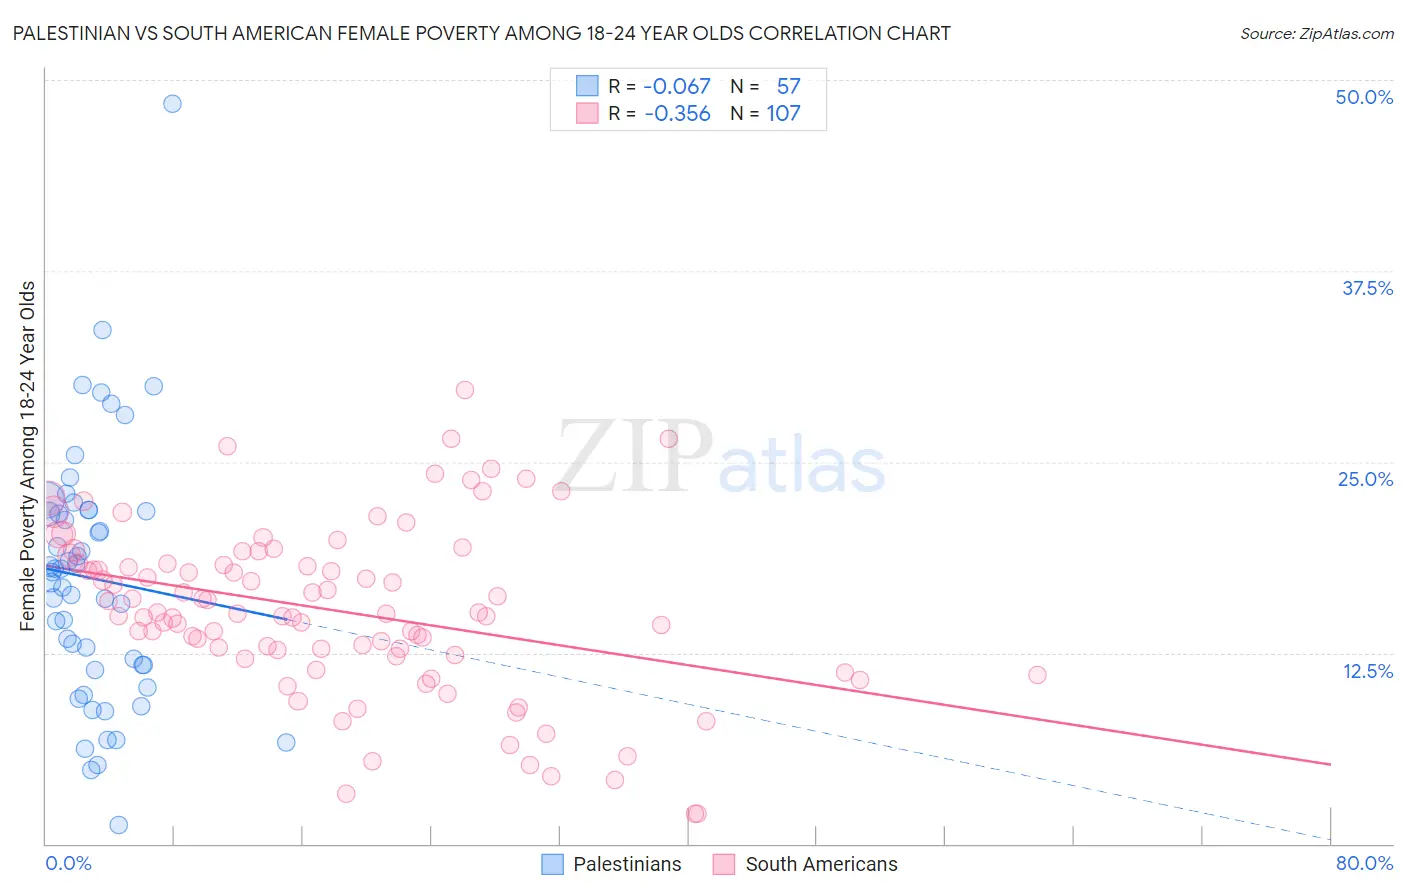 Palestinian vs South American Female Poverty Among 18-24 Year Olds